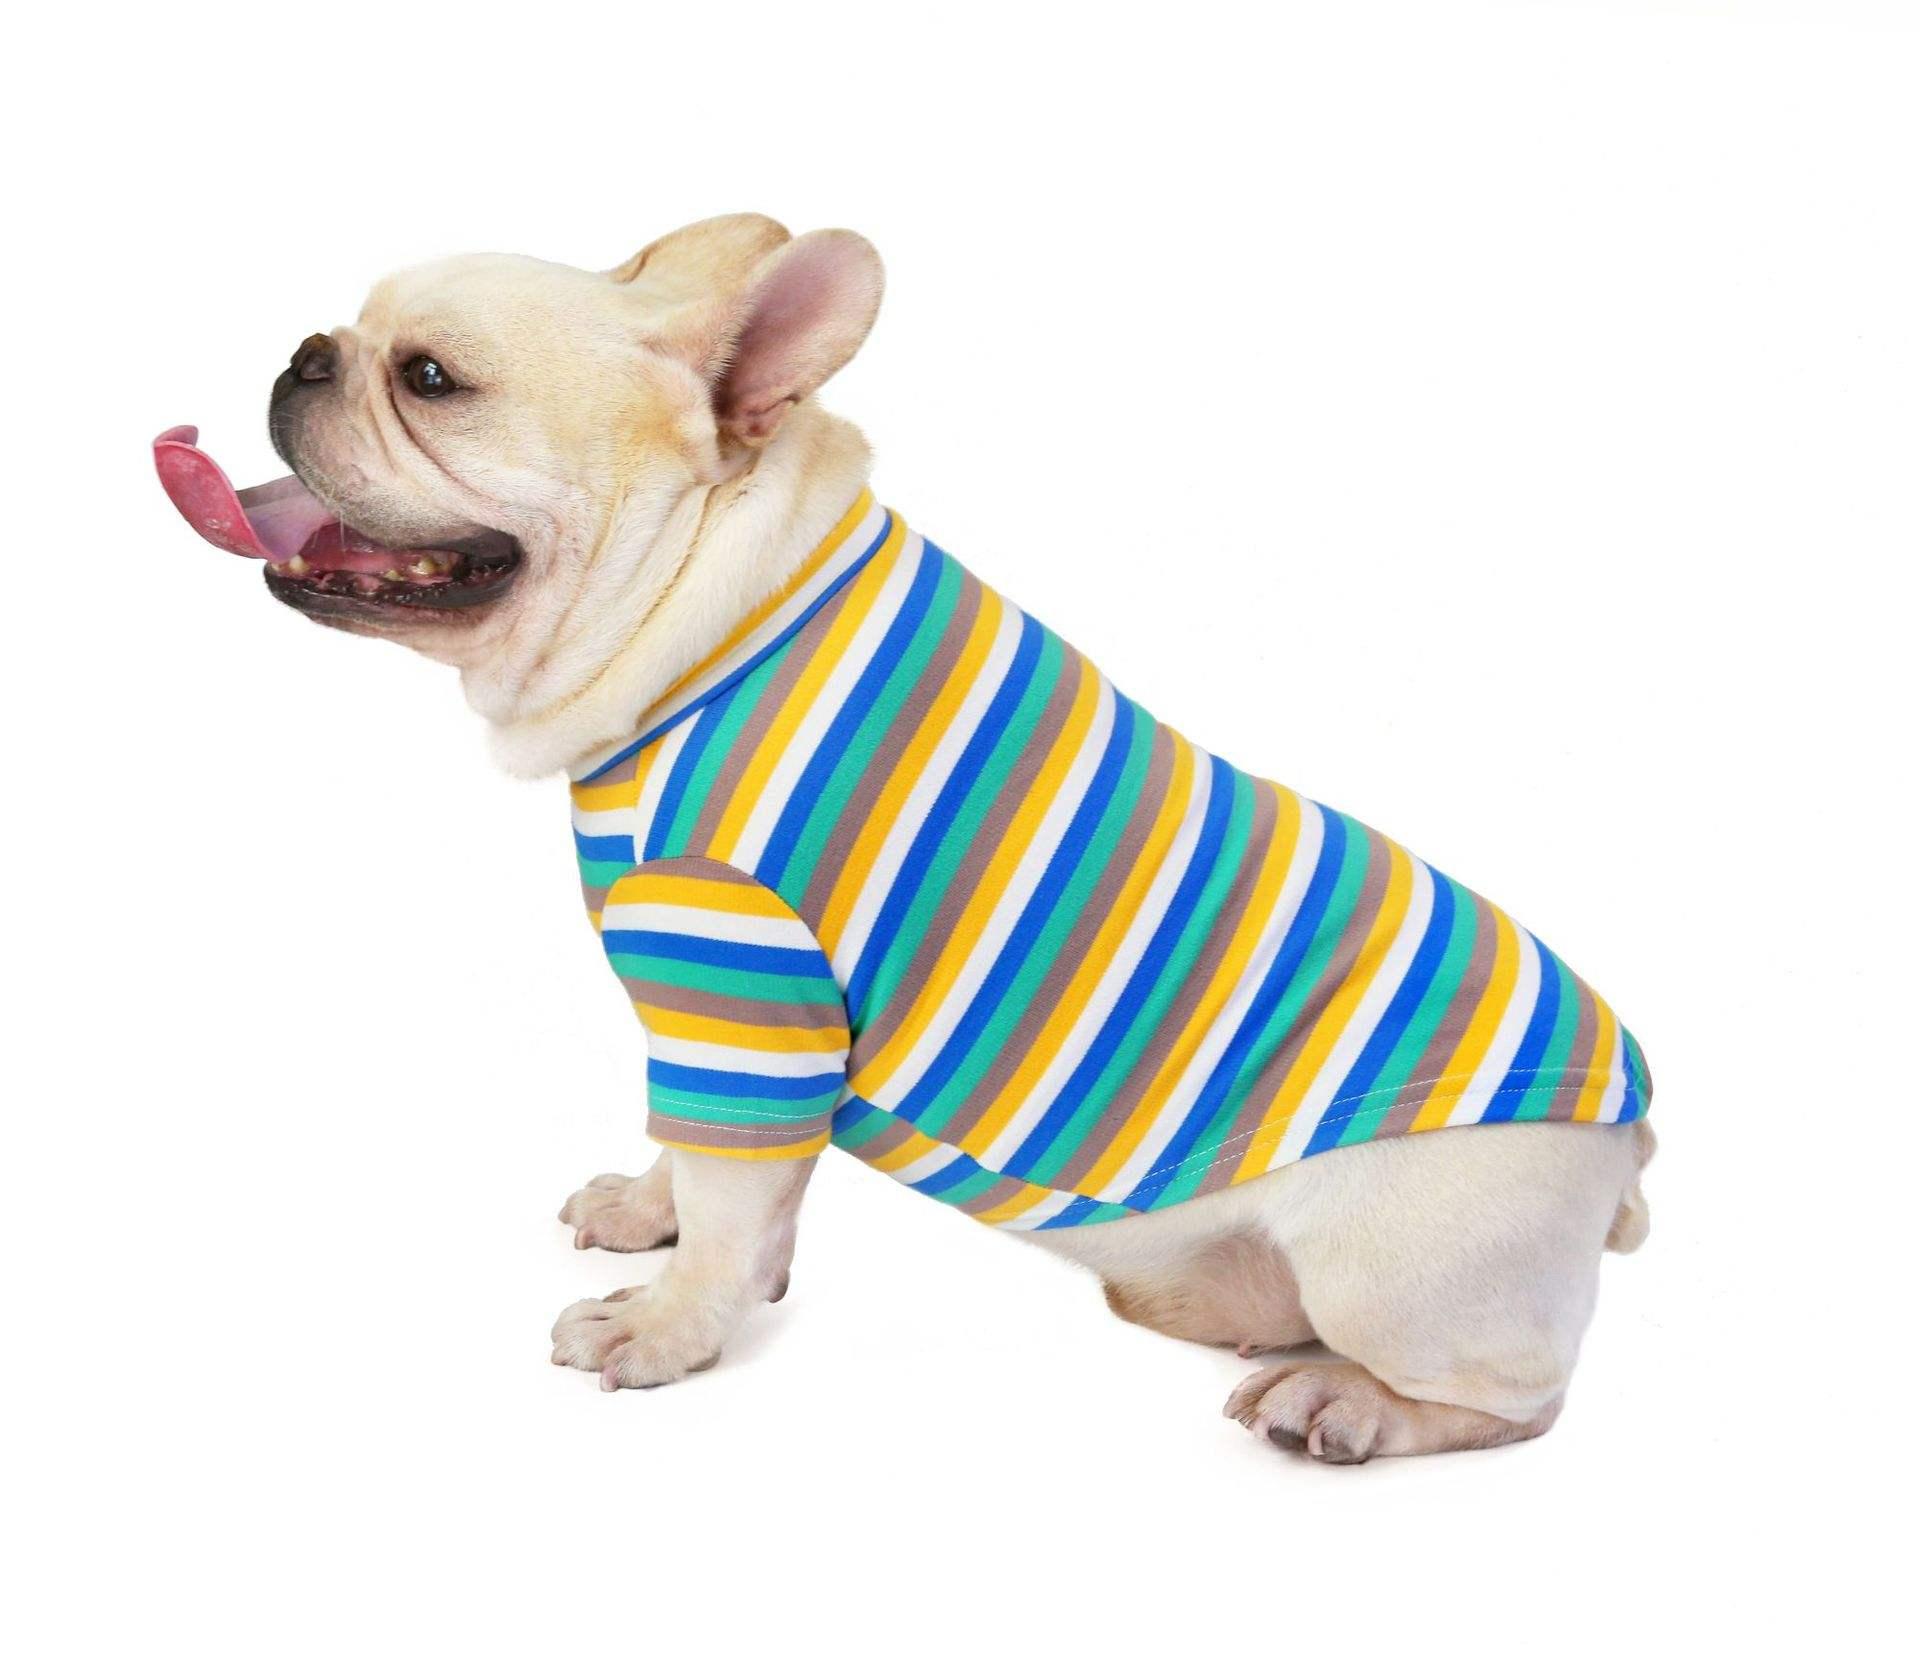 New Pet T-shirt Wild Striped Pajamas Soft Knit Recycled Pet Fashion Hoodie Dog Clothes